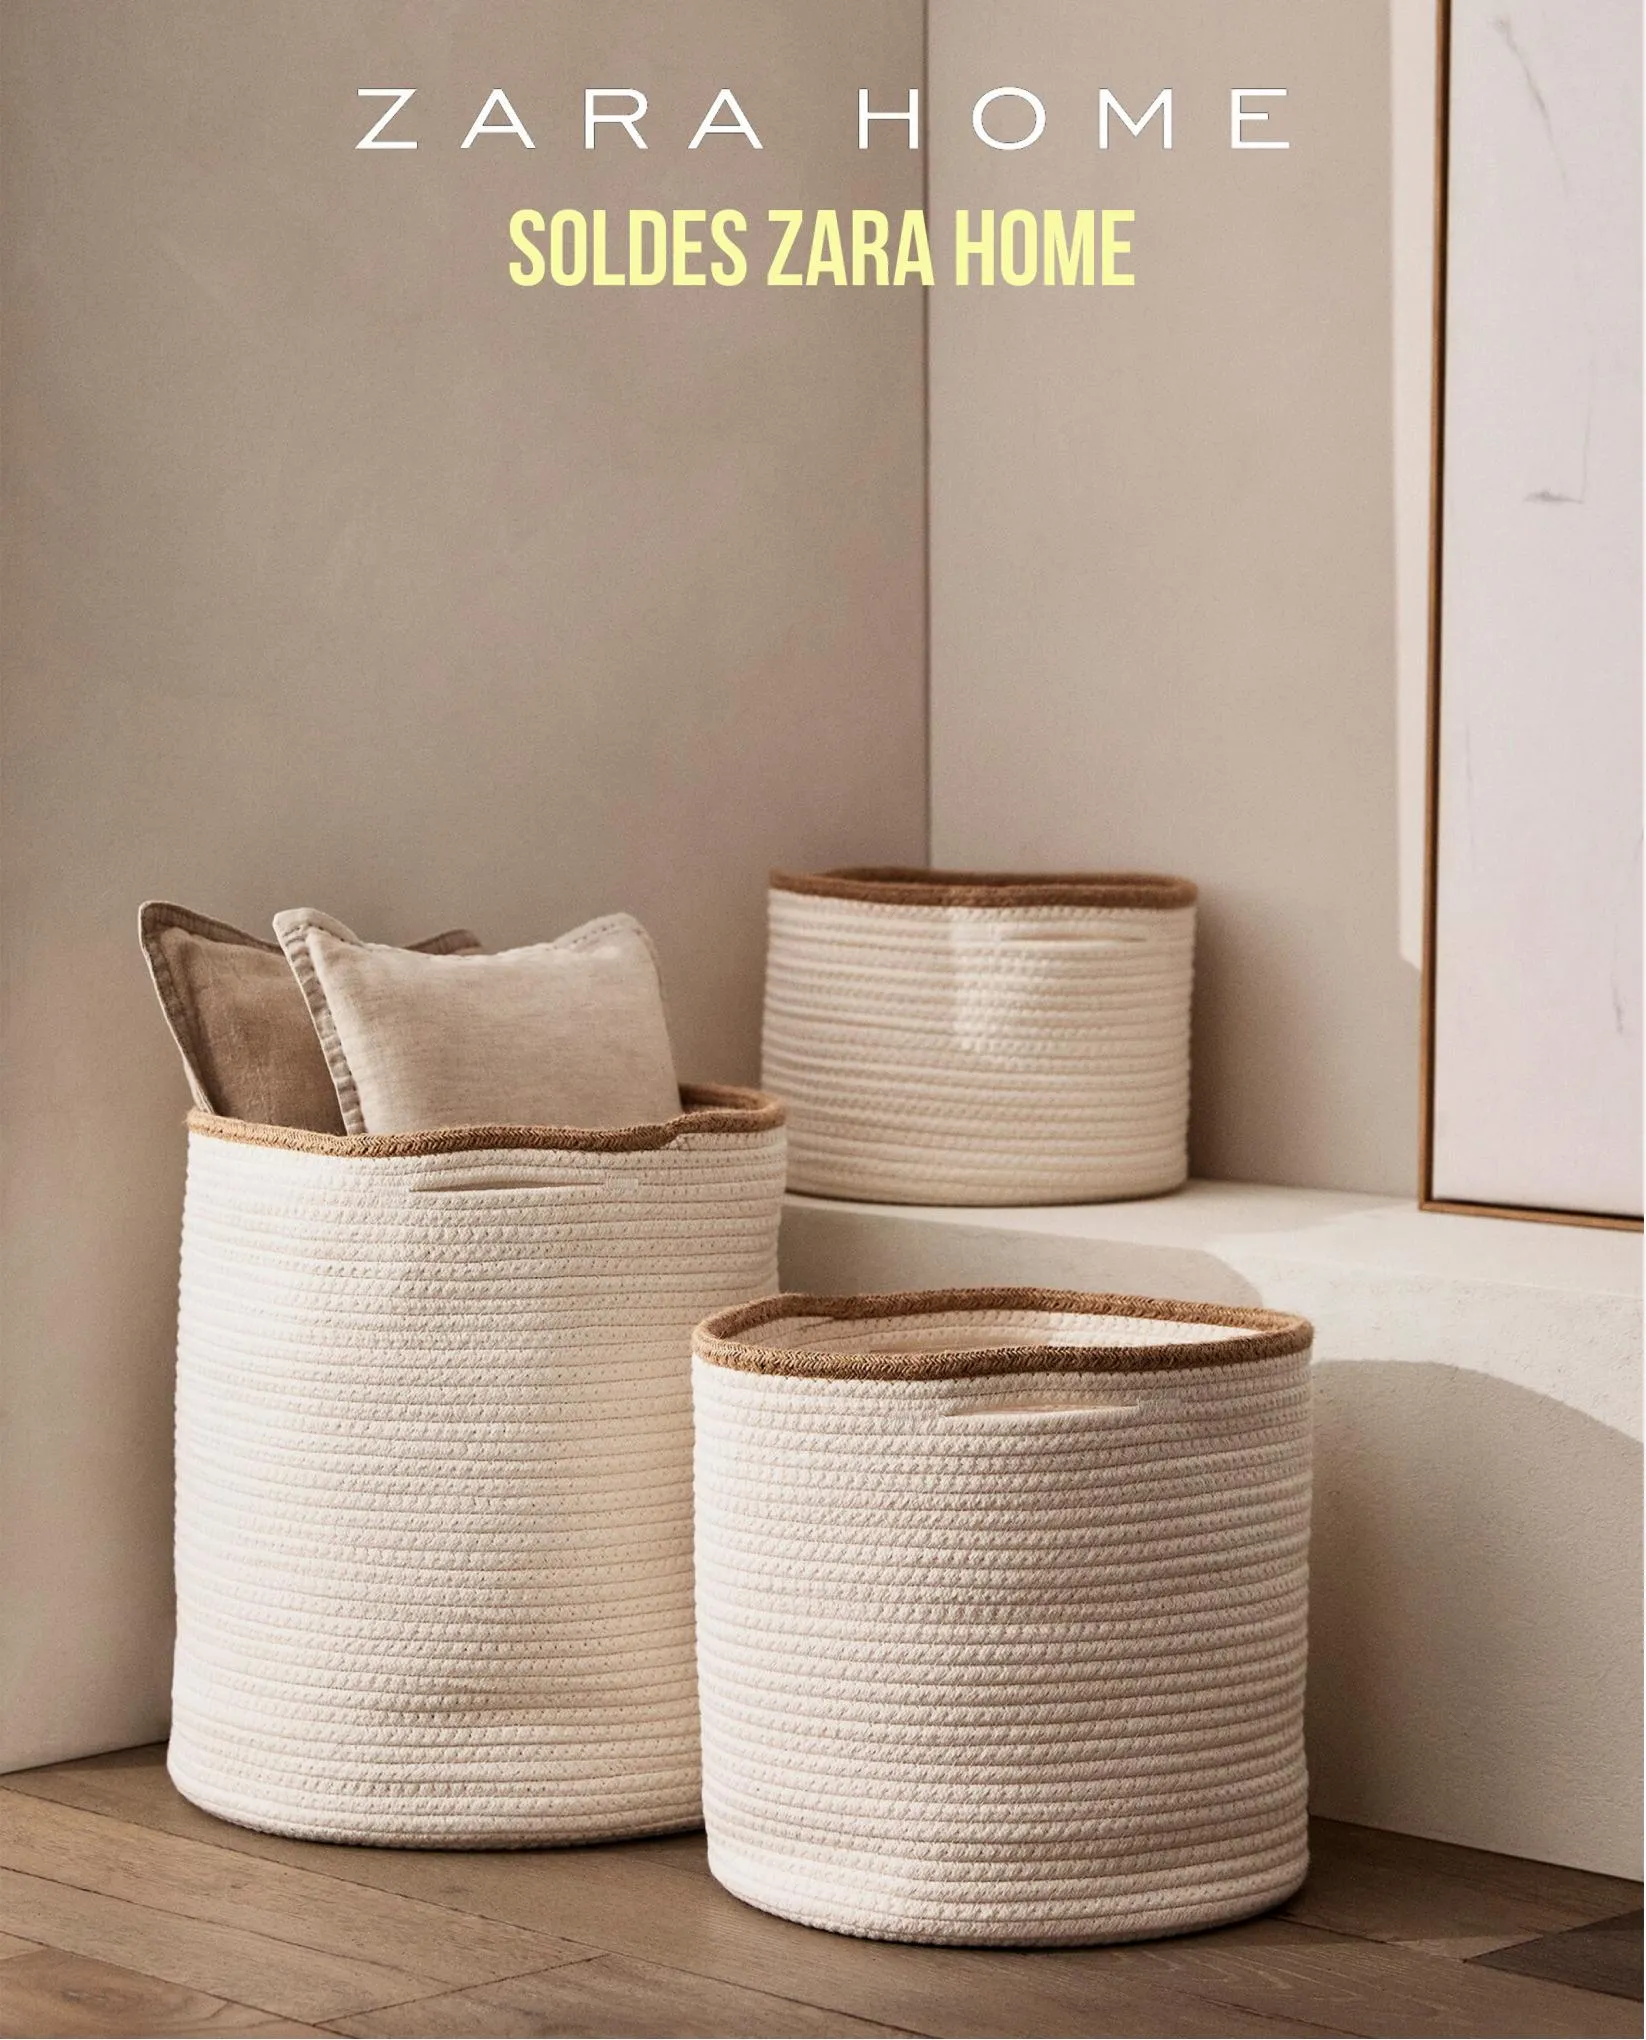 Catalogue Soldes Zara Home, page 00001